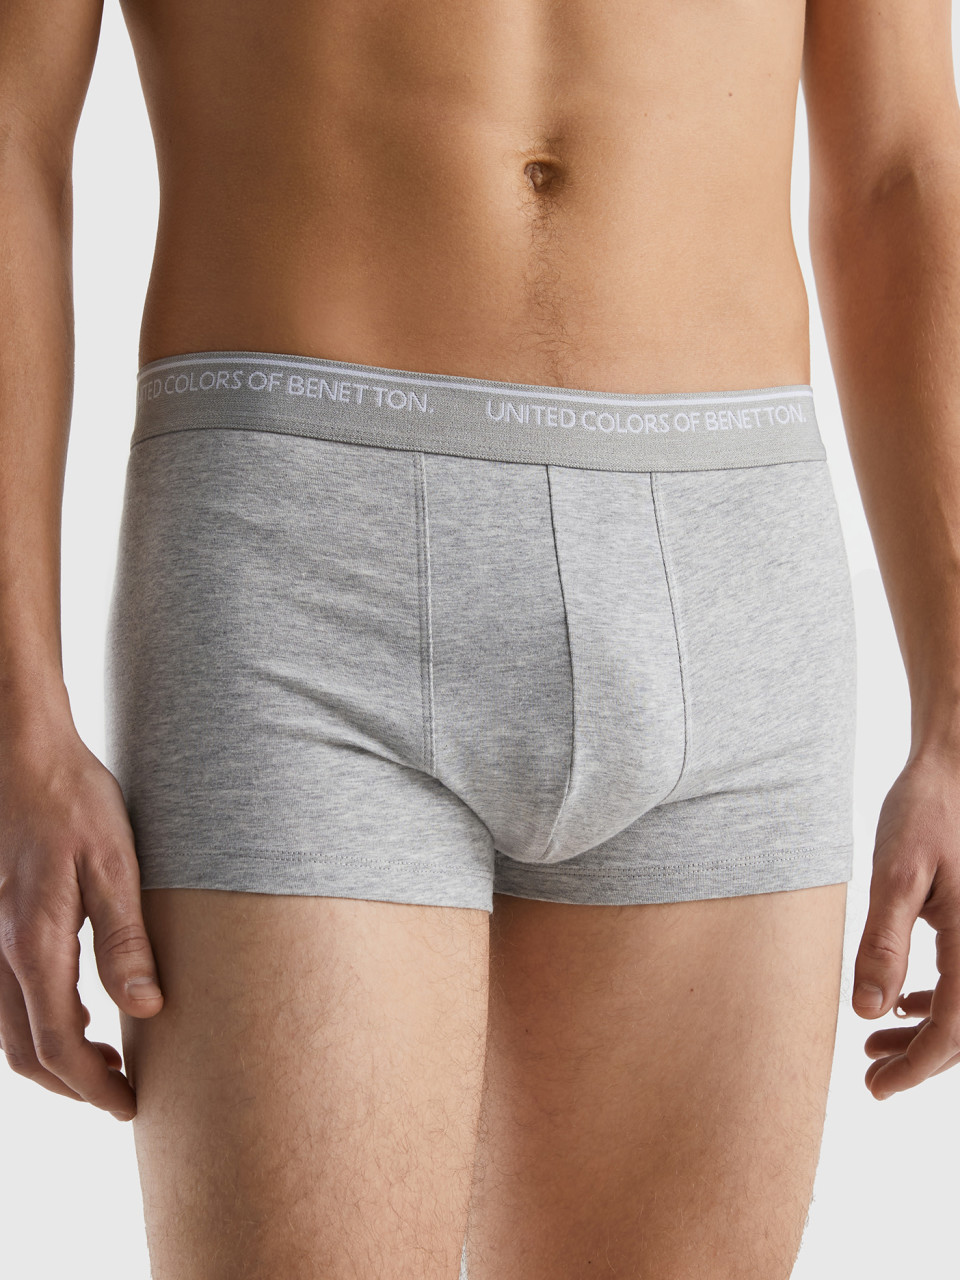 Benetton, Fitted Boxers In Organic Cotton, Light Gray, Men